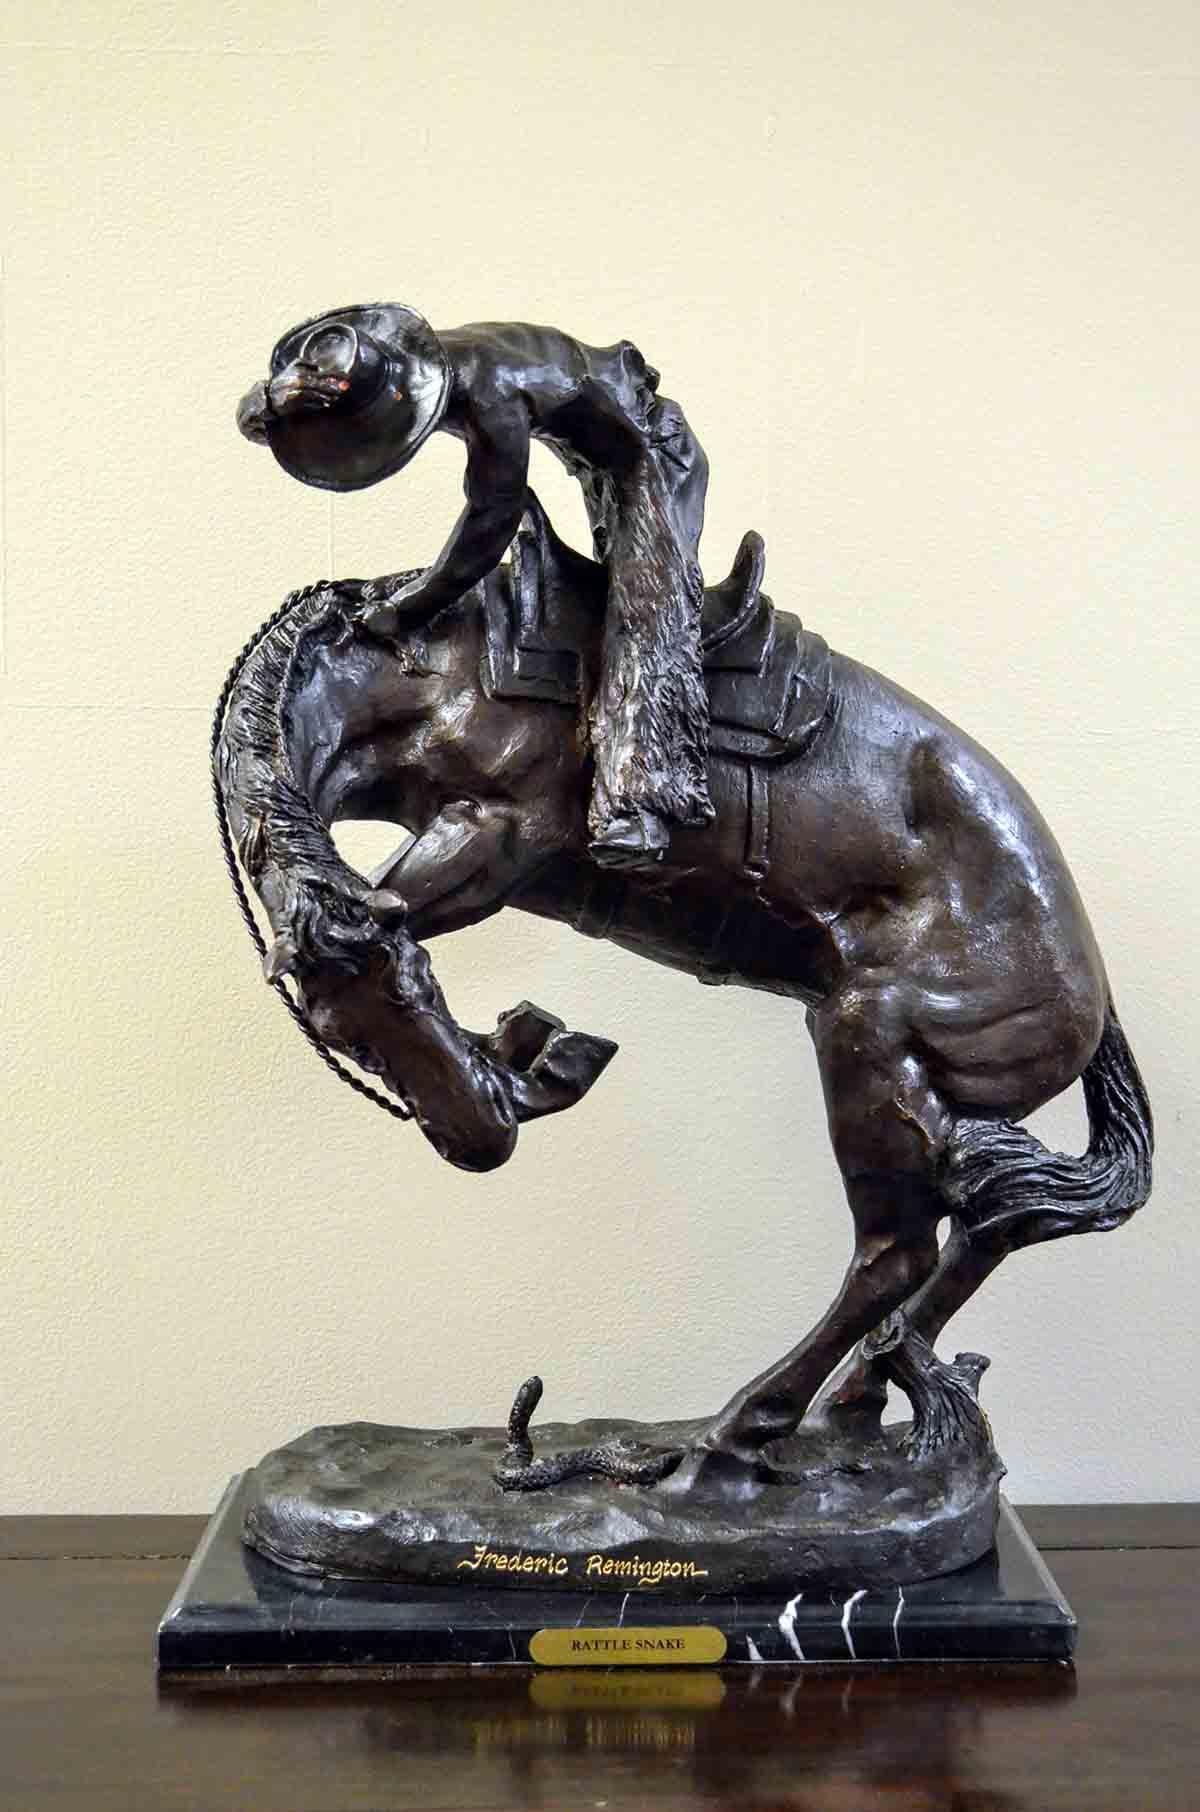 The Rattlesnake, a cast bronze sculpture after American artist Frederic Remington on marble base. Filled with a tremendous dramatic tension, this bronze sculpture depicts a scene from the American Old West particularly dear to Frederic Remington. A